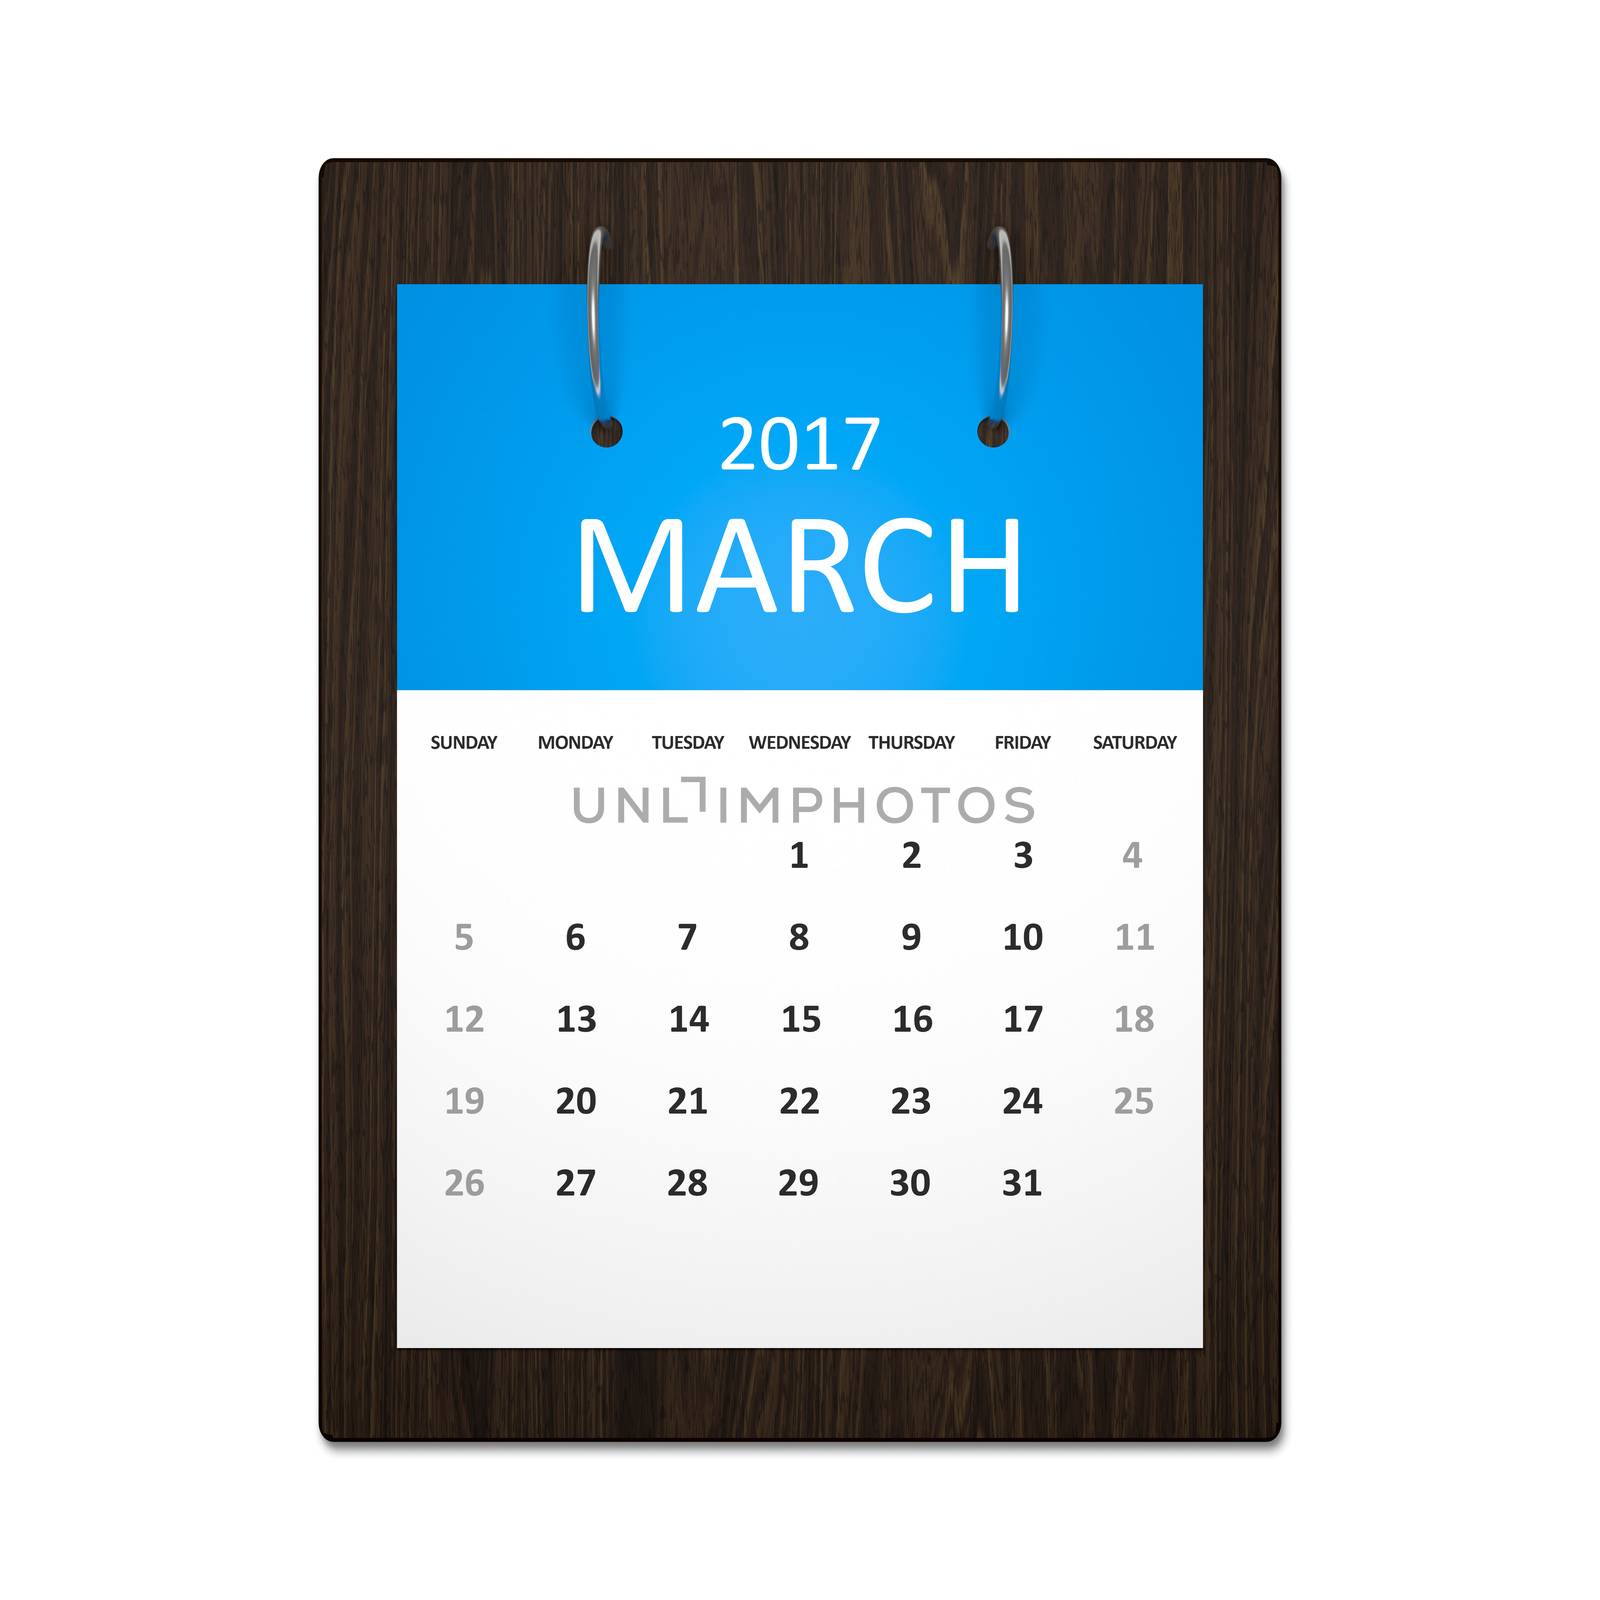 An image of a stylish calendar for event planning 2017 march